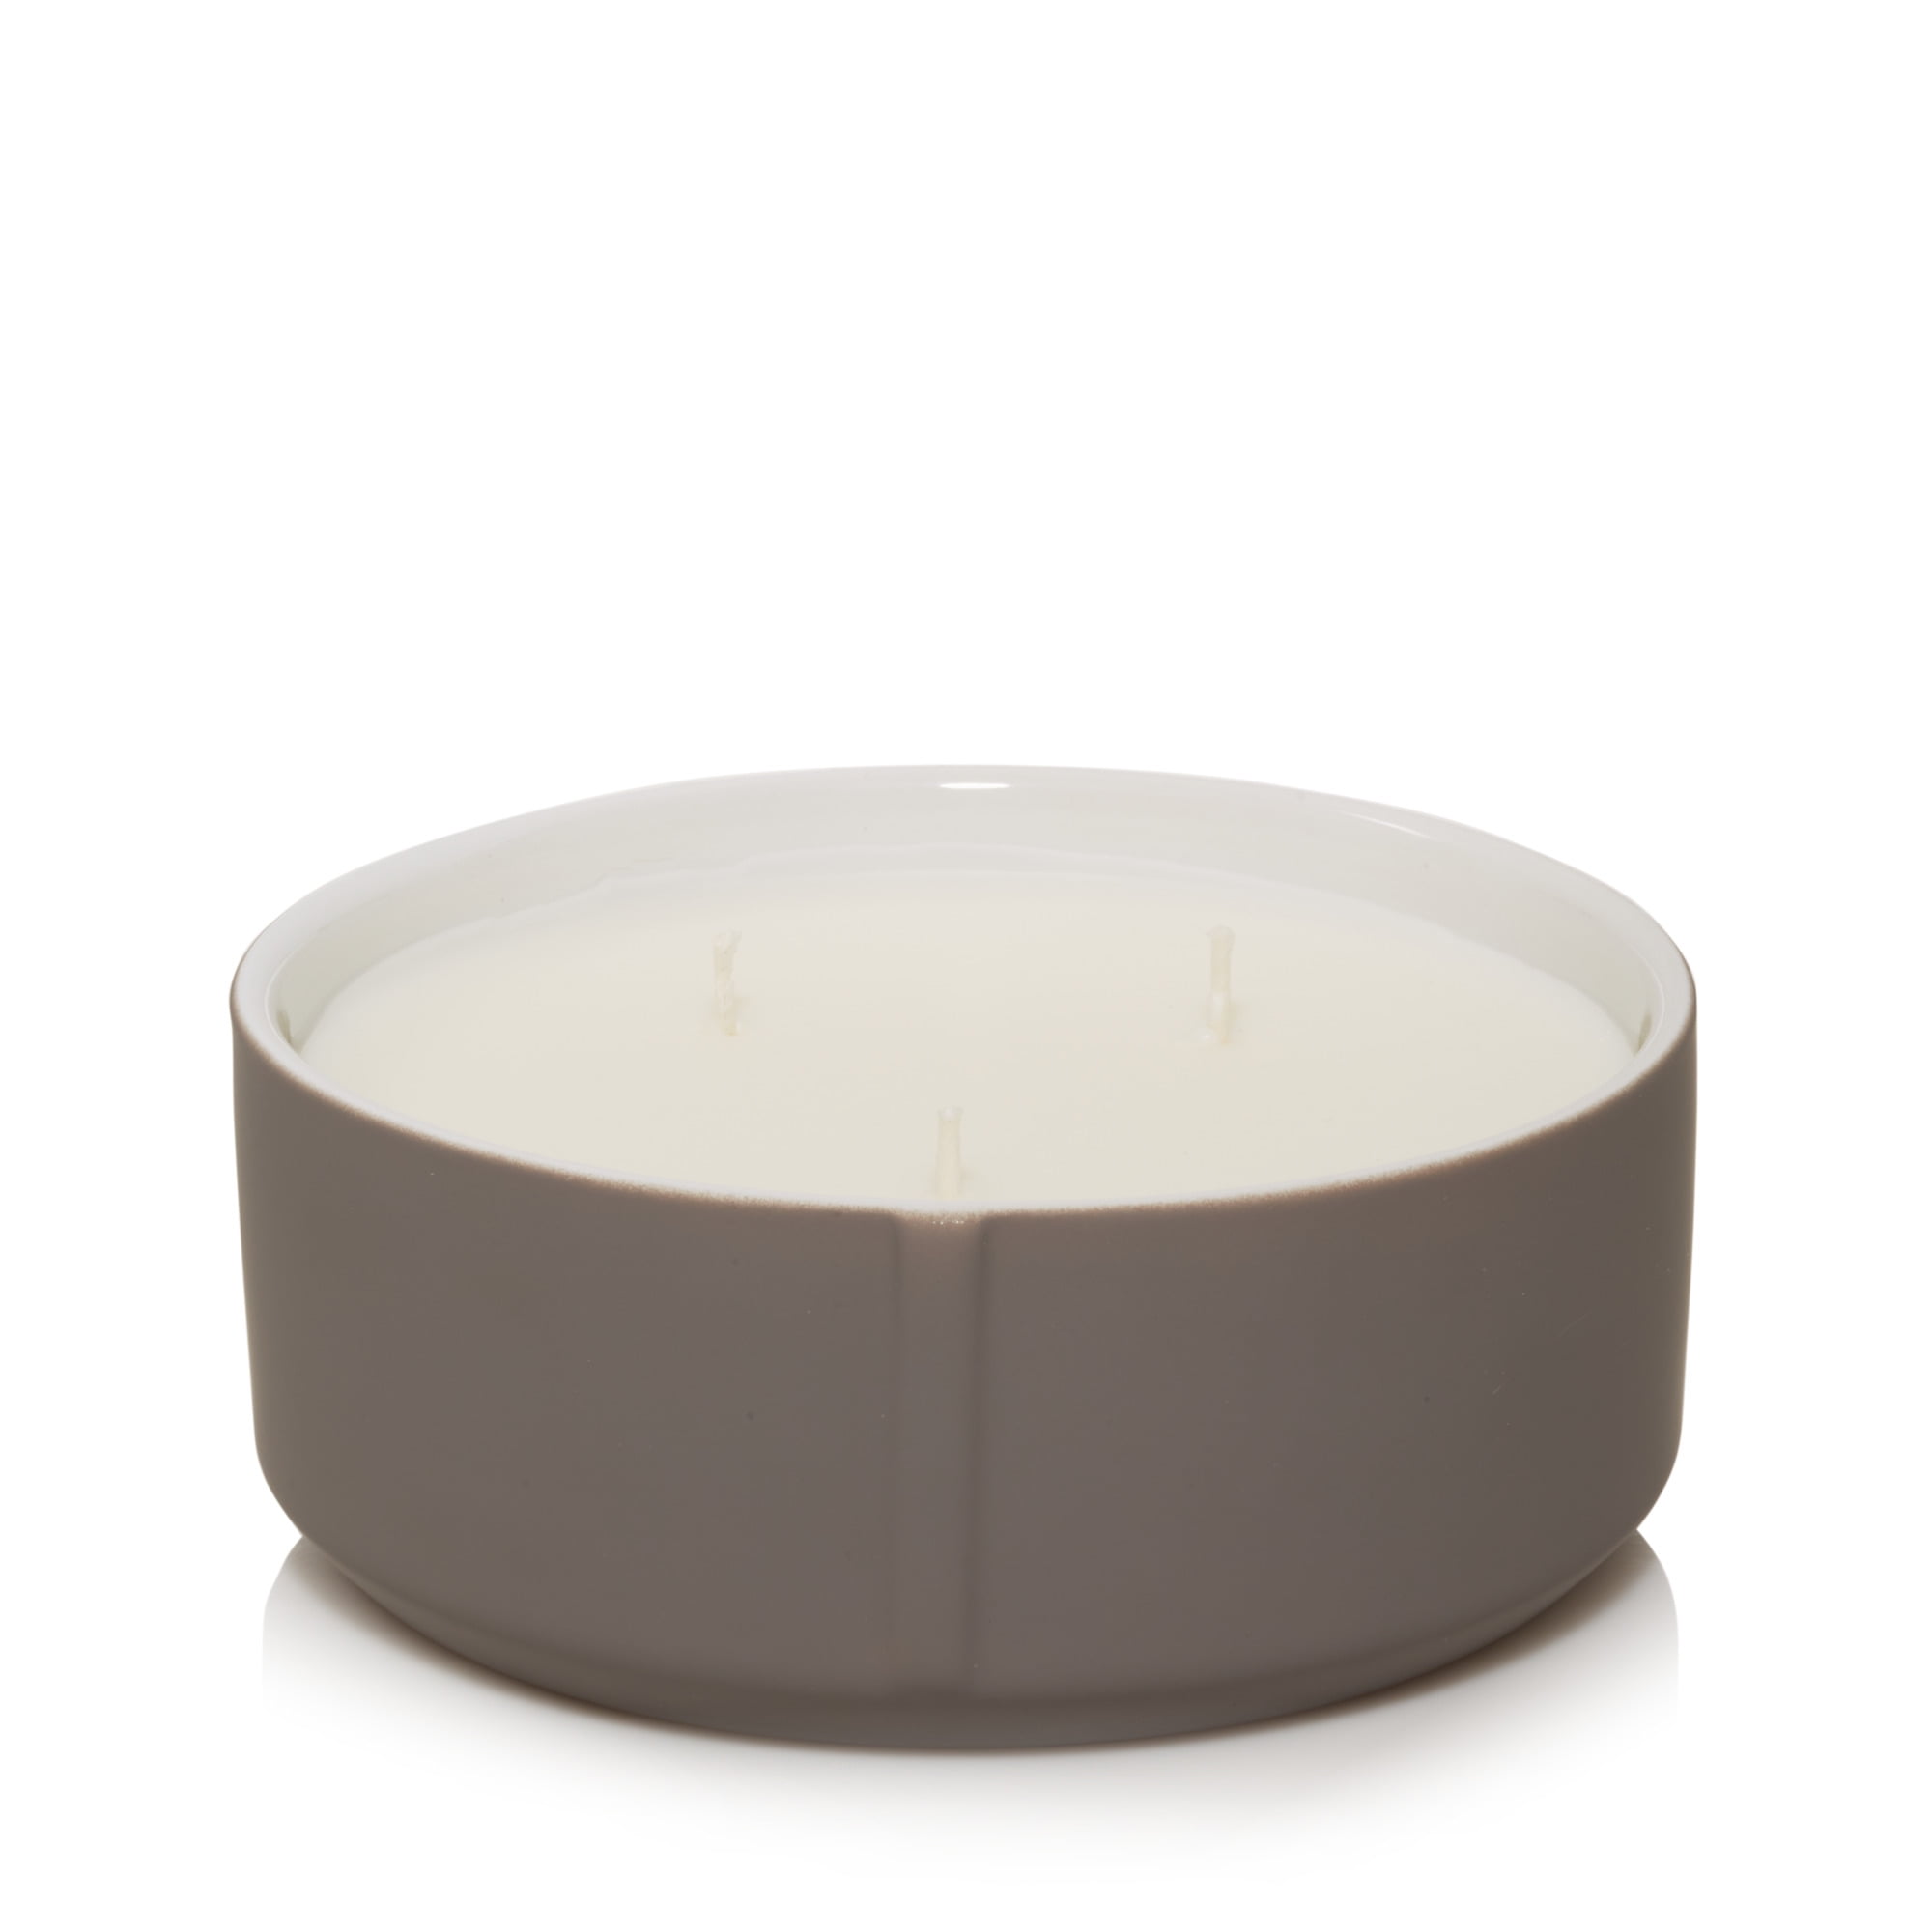 Ceramic Jar Pure Beeswax Candle – The Bath and Wick Shop